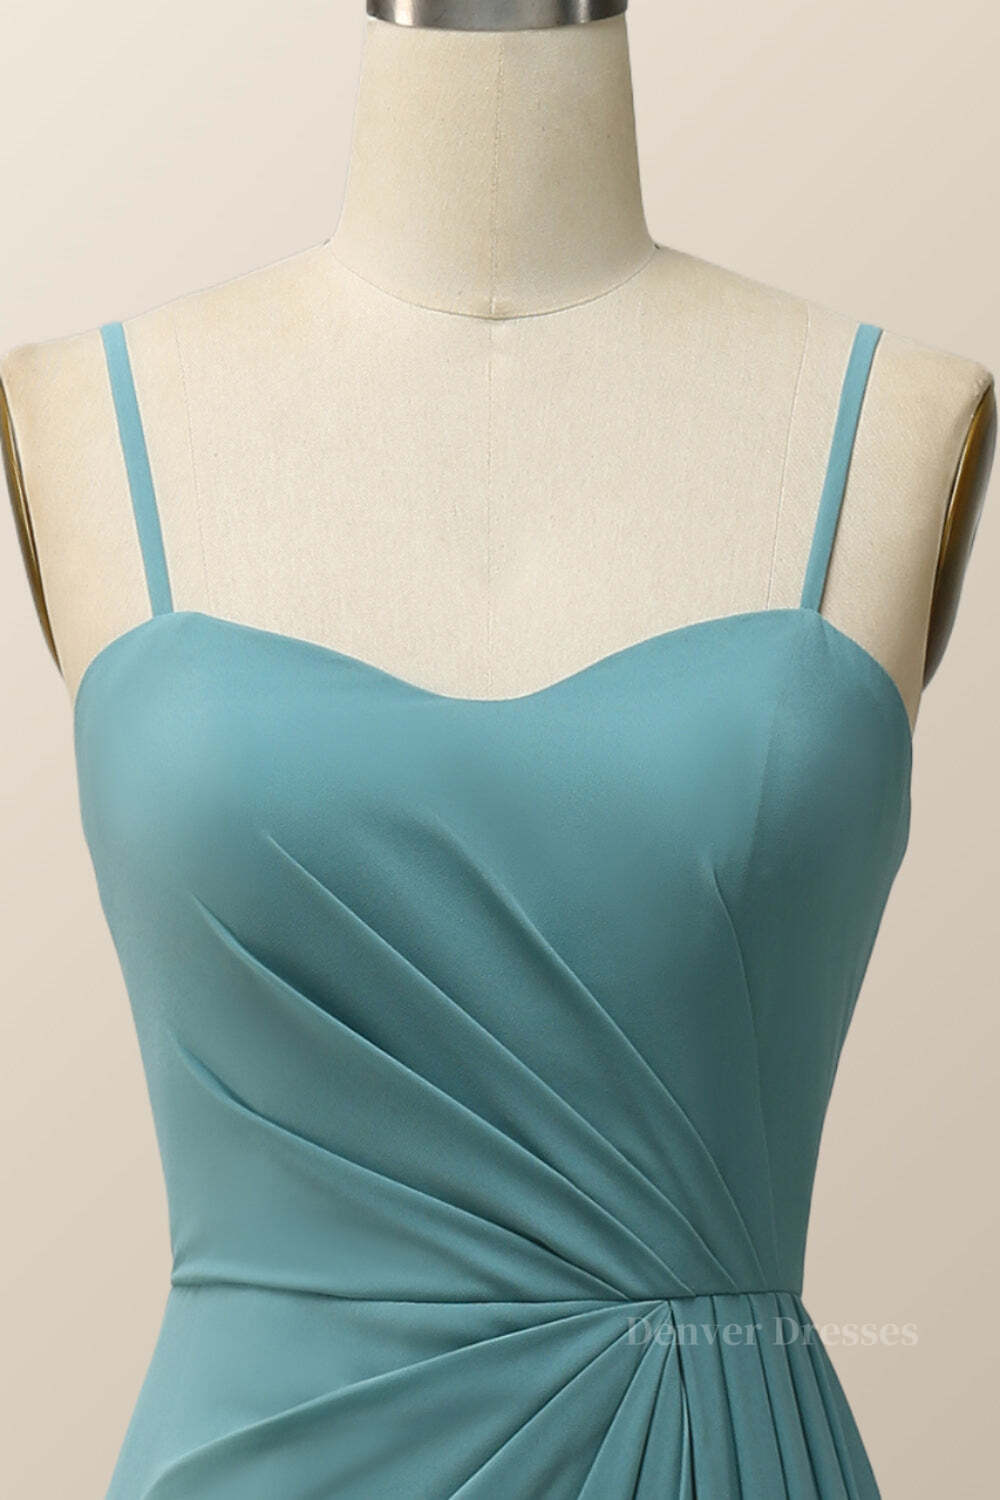 Party Dresses Online, Spaghetti Straps Teal Green Chiffon A-line Long Bridesmaid Dress